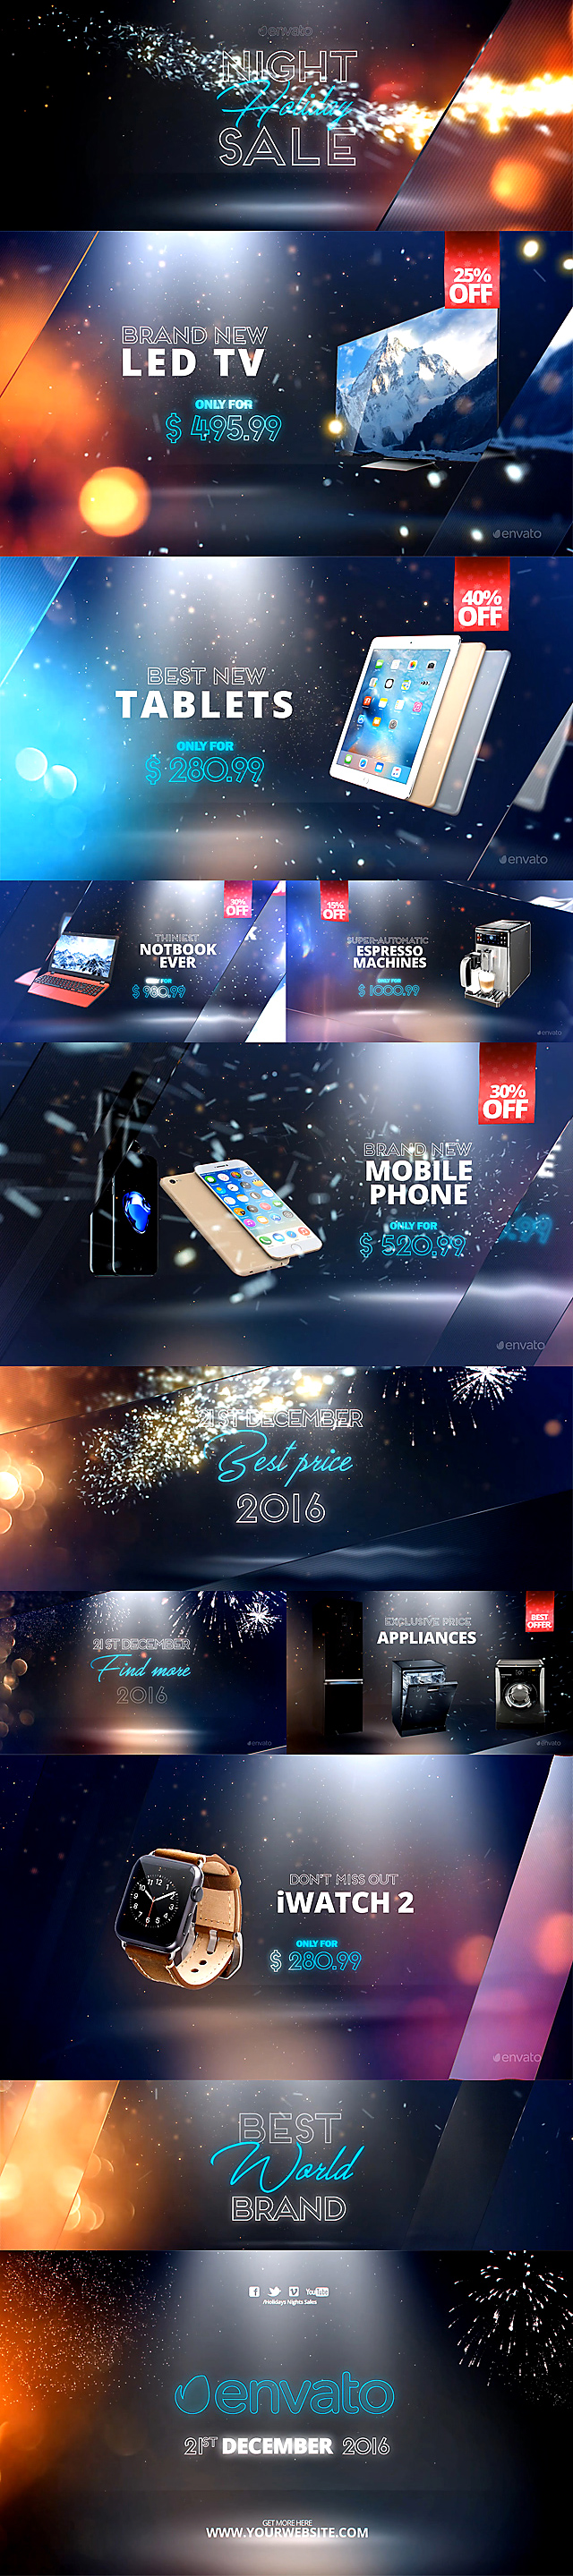 Holiday Sales Template v1.2 - Project for After Effects (Videohive)